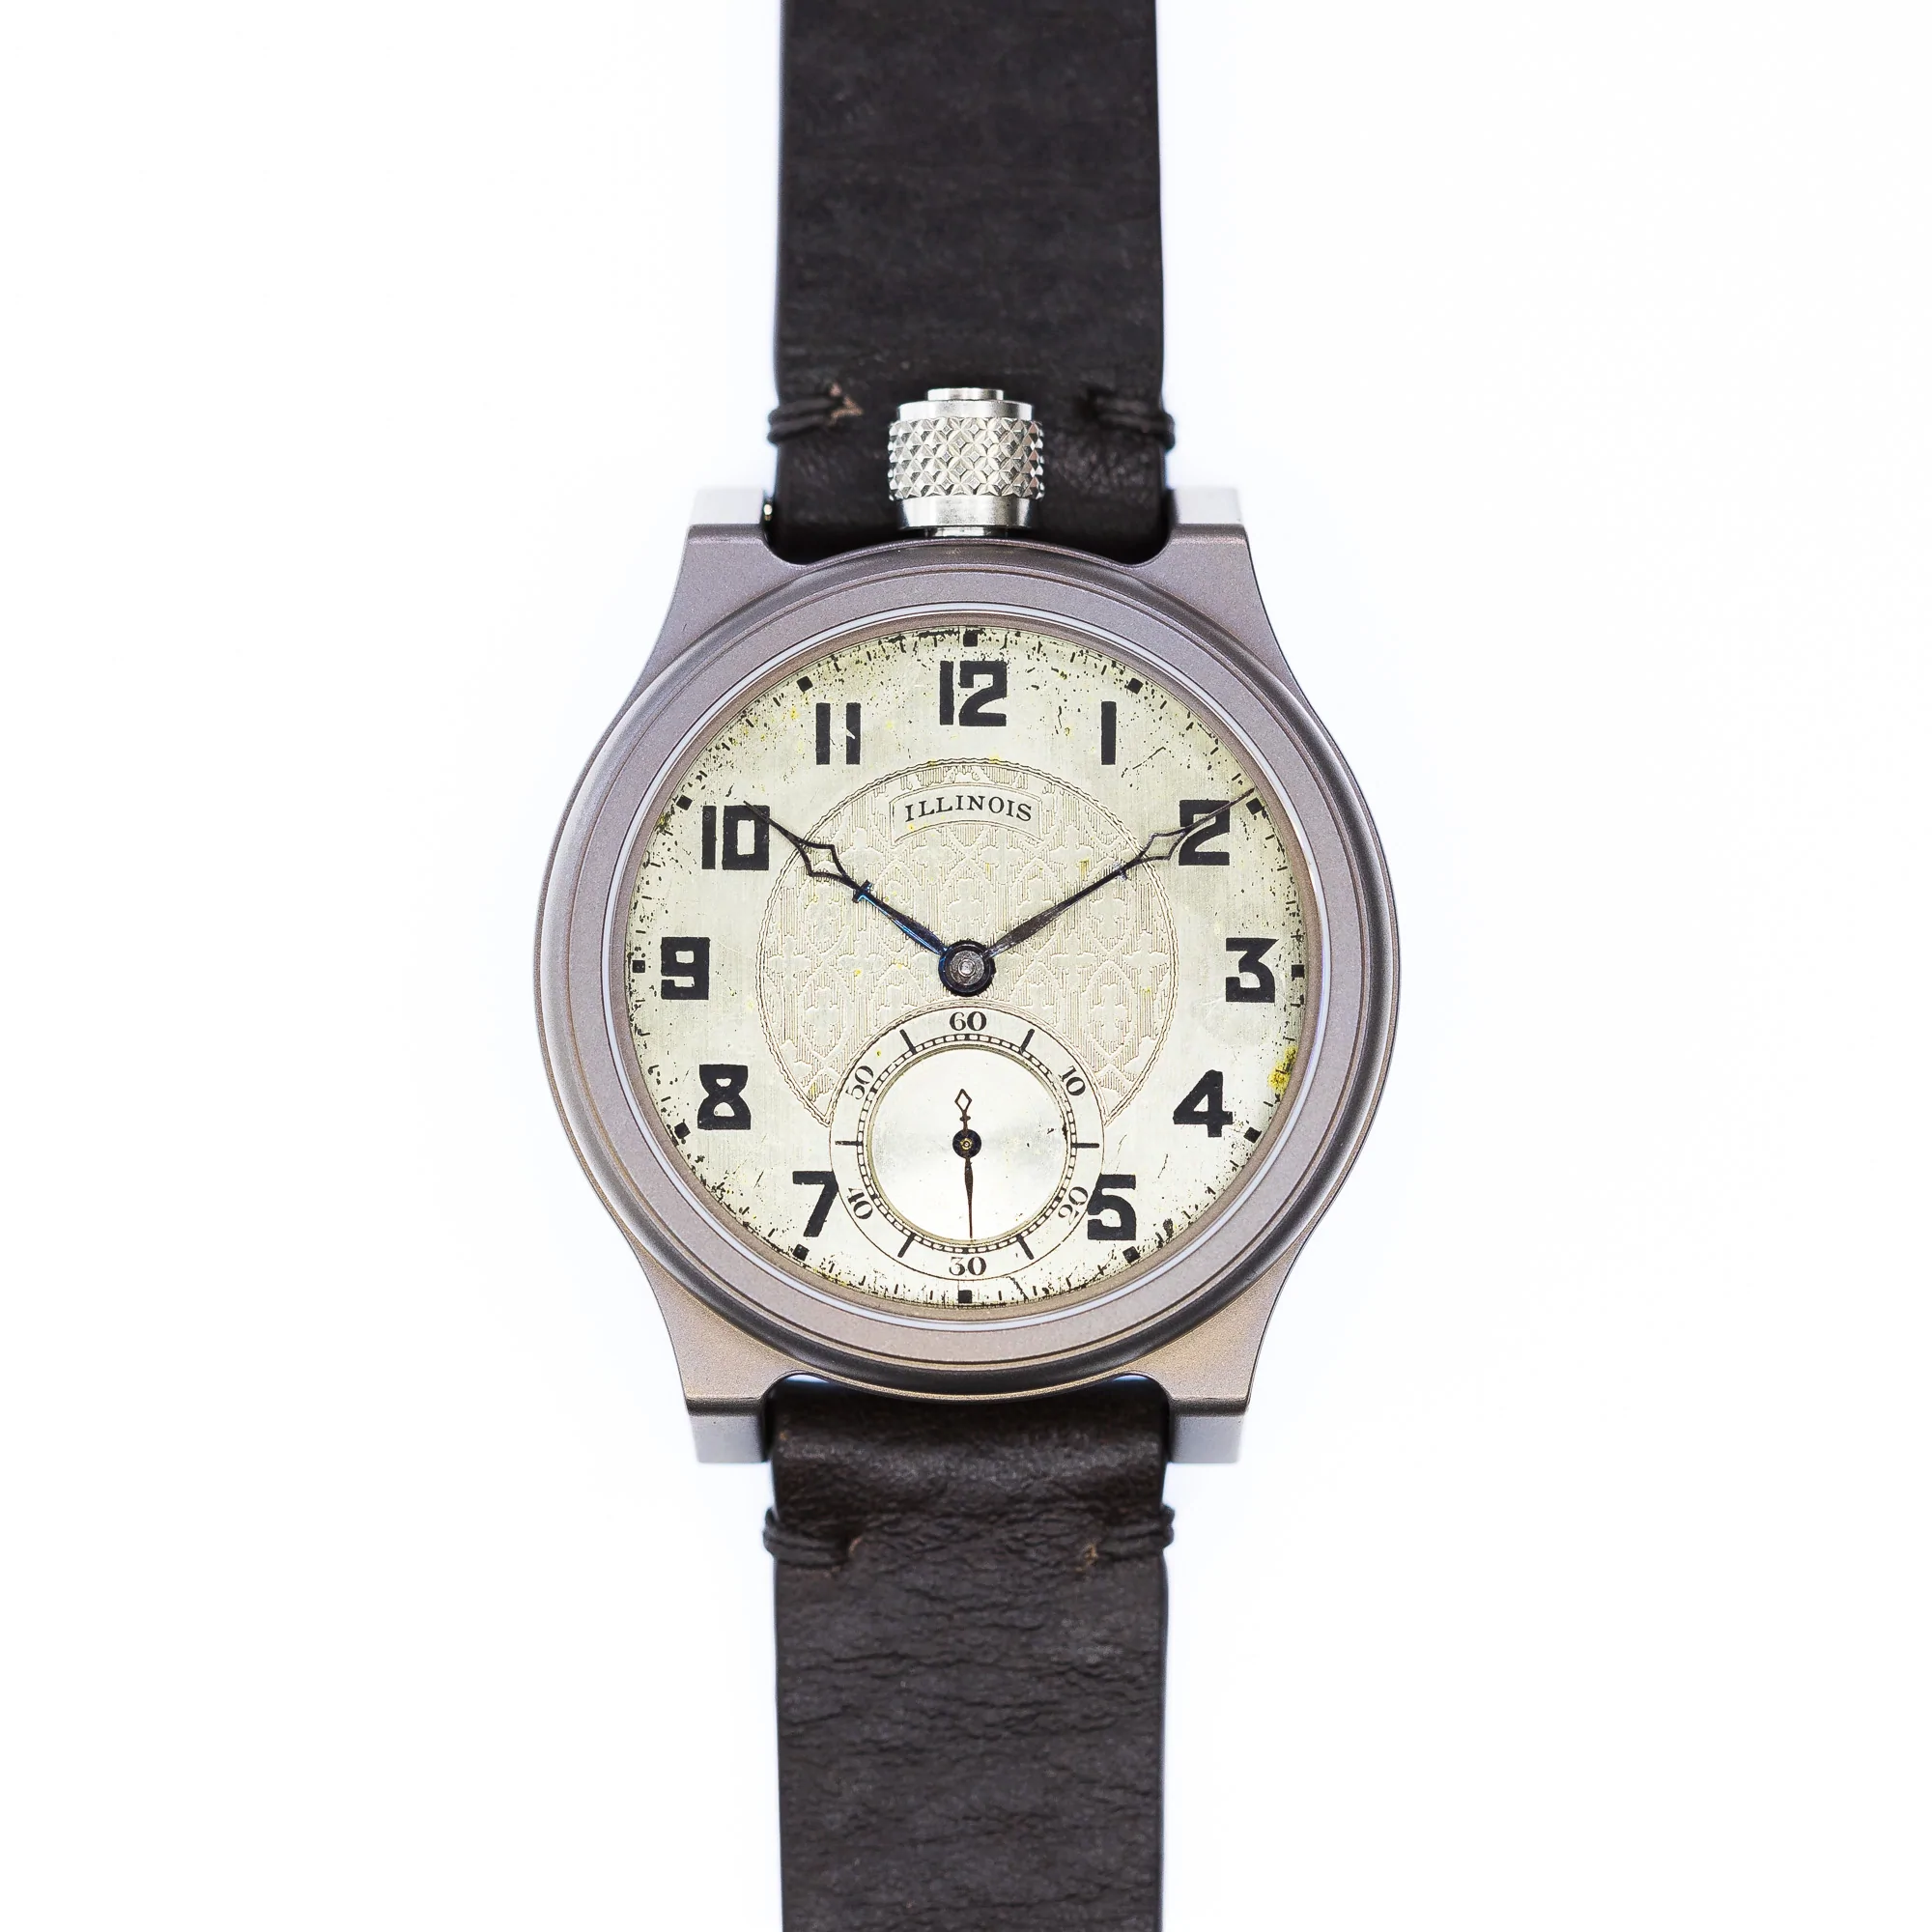 Vortic Watches The Springfield 552 (46mm)